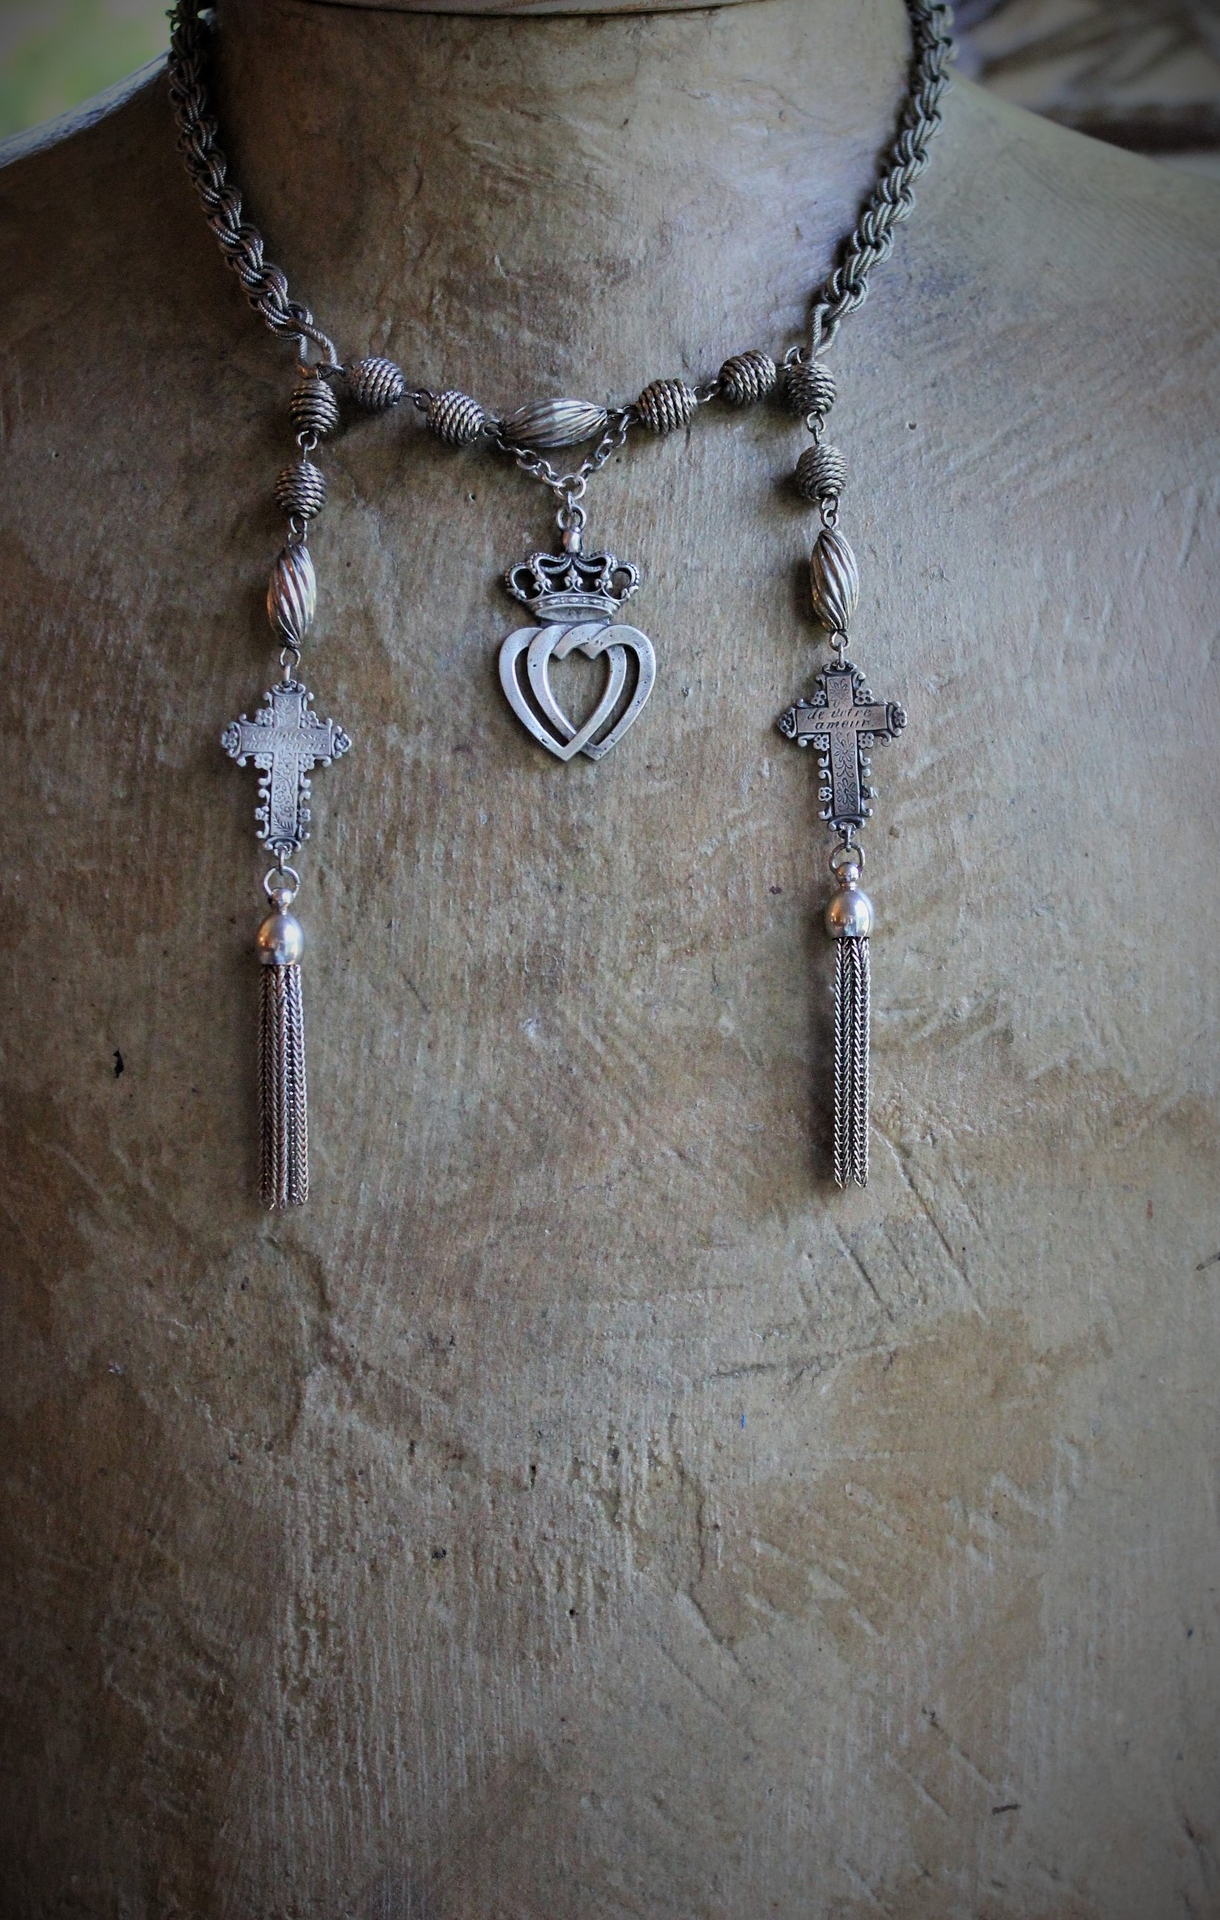 Fill my Heart with Your Love Necklace w/Antique Engraved French Crosses,Antique French Double Crowned Heart Medal, Antique Foxtail Chain Tassels